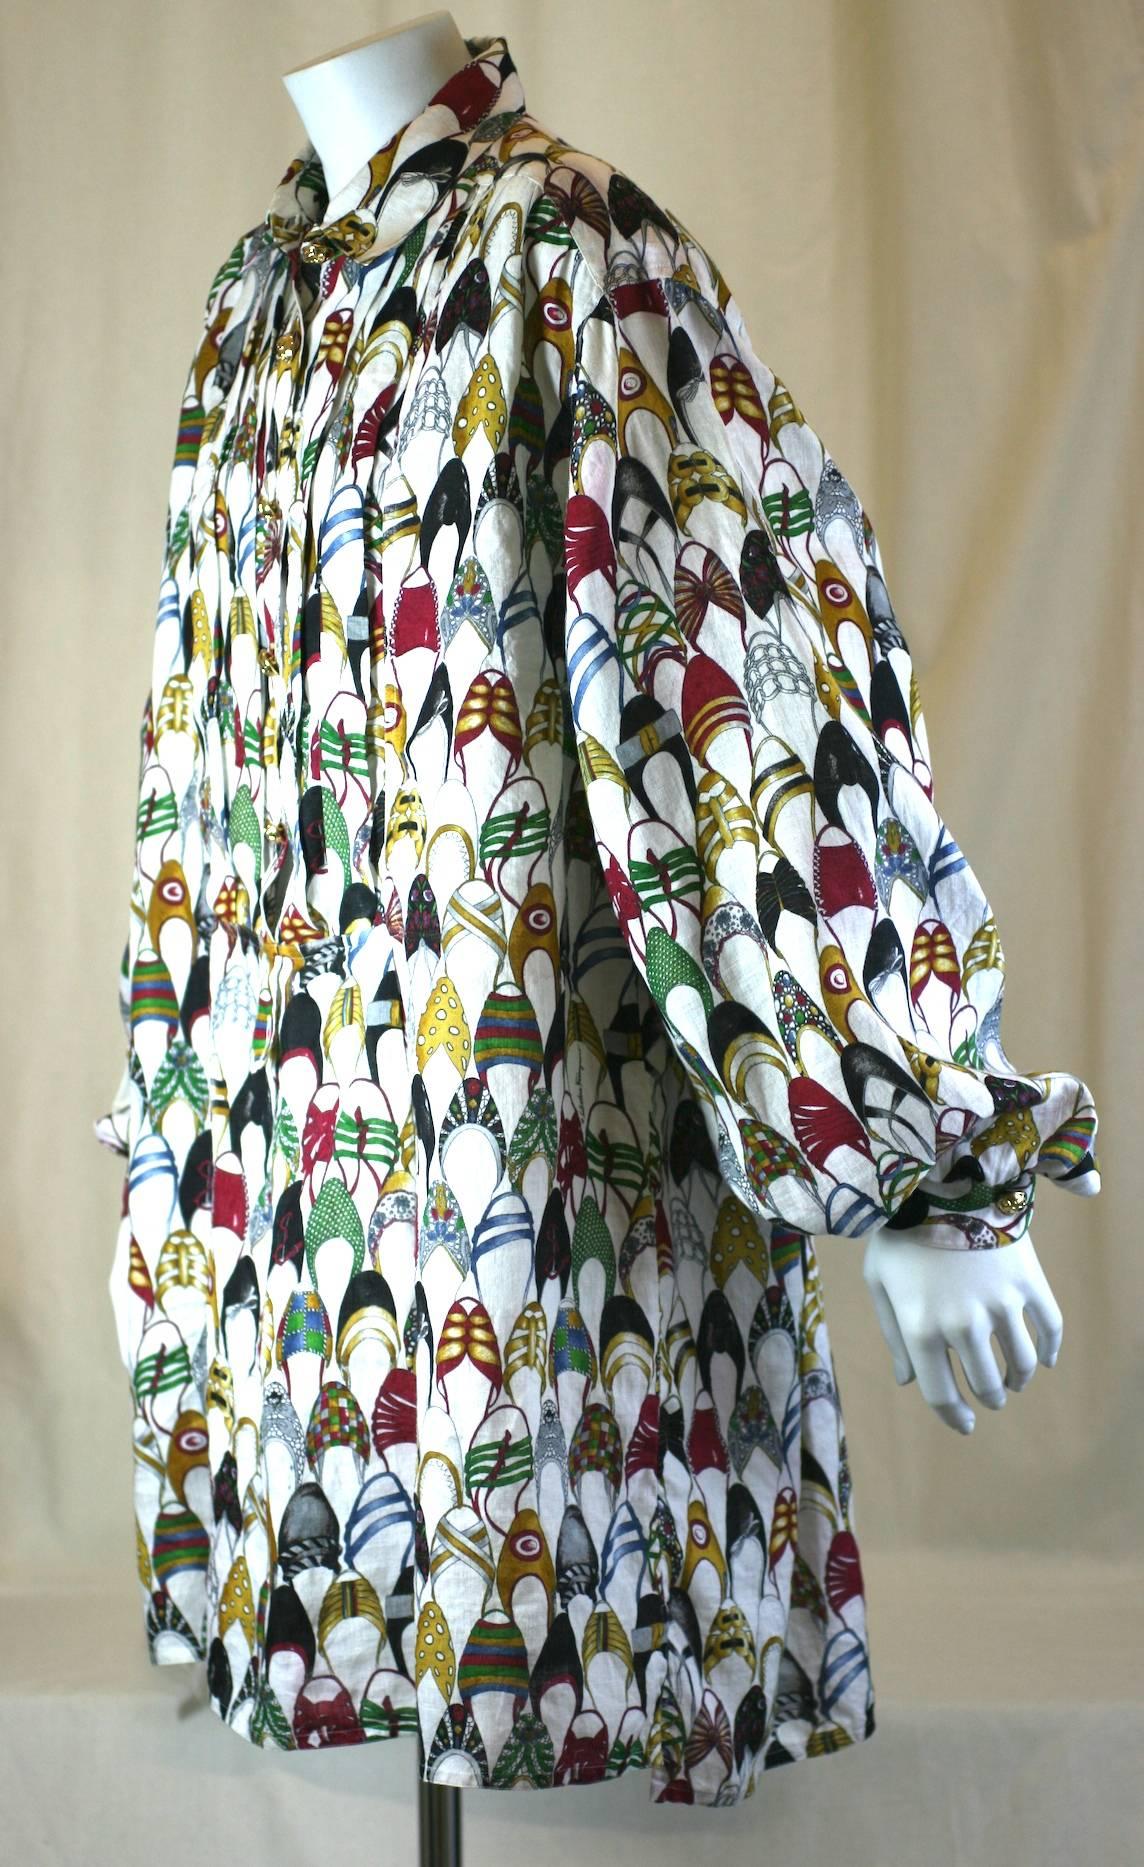 Fun Salvatore Ferragamo Shoe Print Linen Tunic with gold shoe buttons. Tuxedo style pleated bib with gathered yoke and full poet sleeves. 
Size: Large. Italy 1990's. Excellent condition. 
32